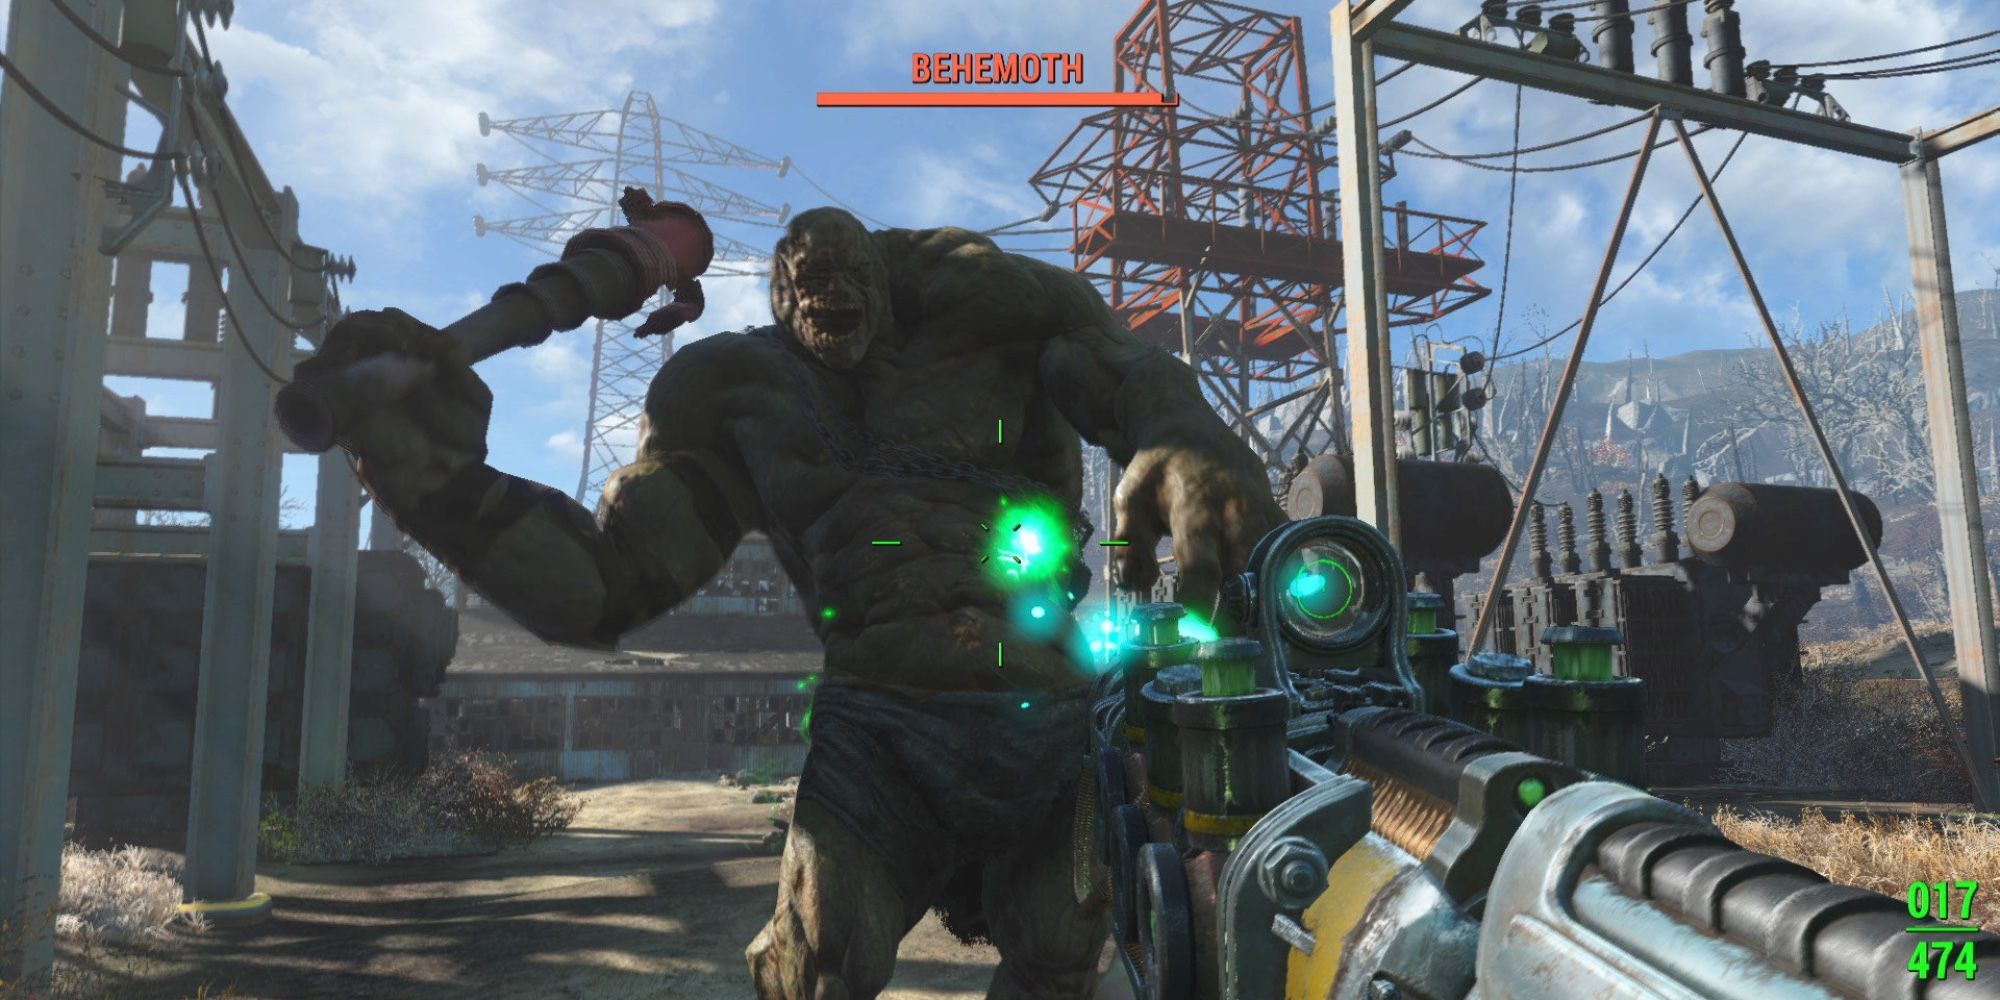 Popular Games on Steam - Fallout 4 - Player attacks Behemoth